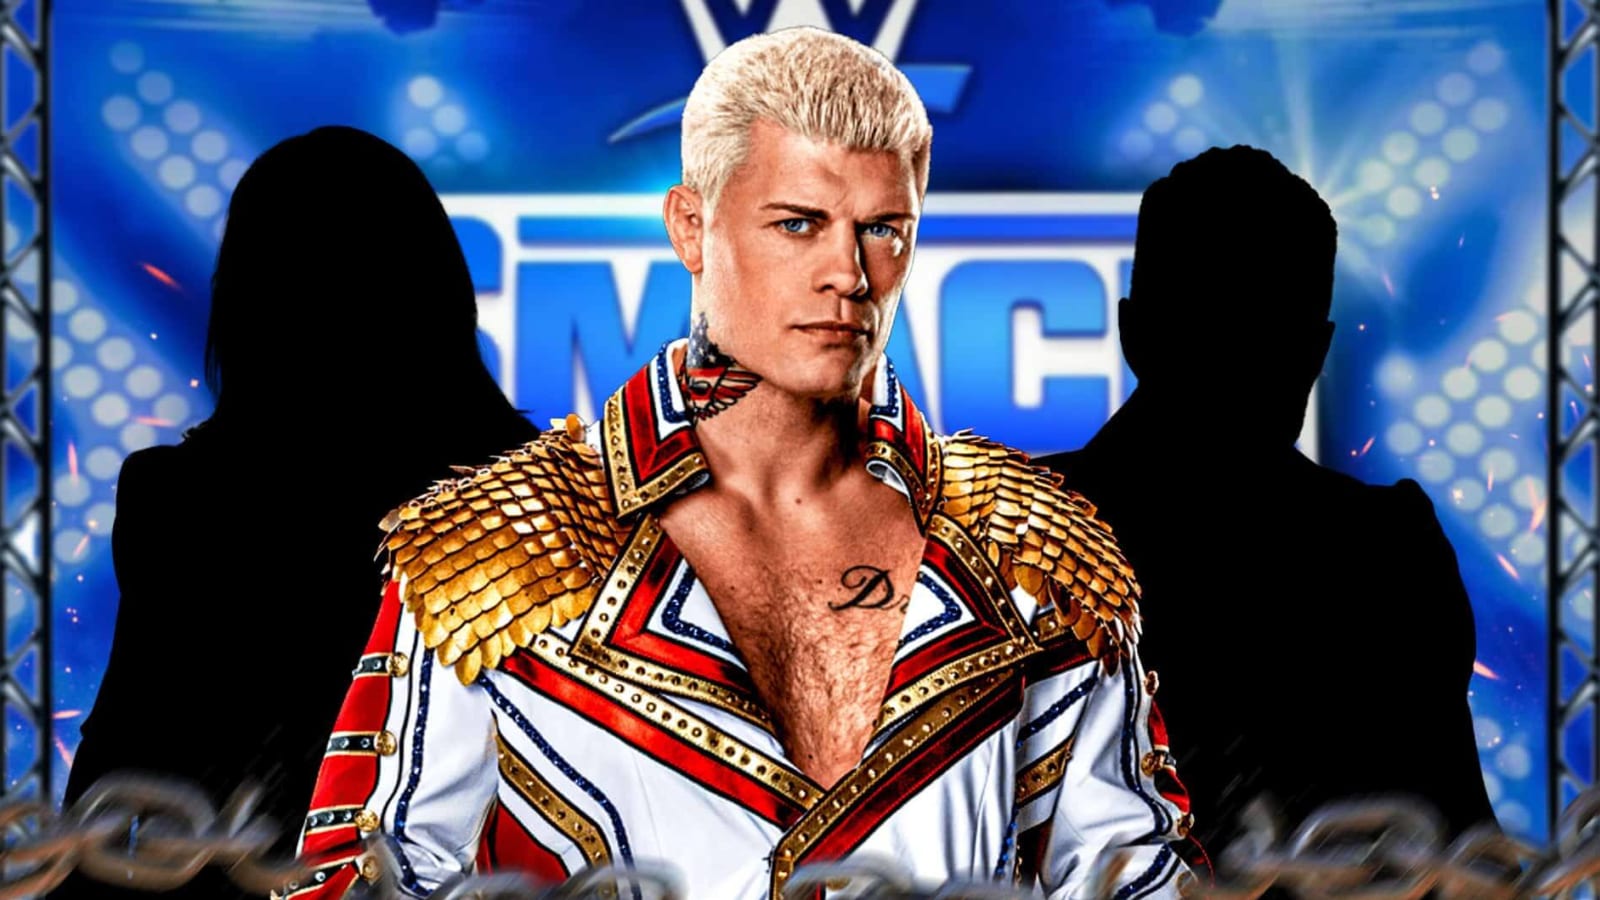 Cody Rhodes names two foes he’d love to wrestle on a future WWE Premium Live Event